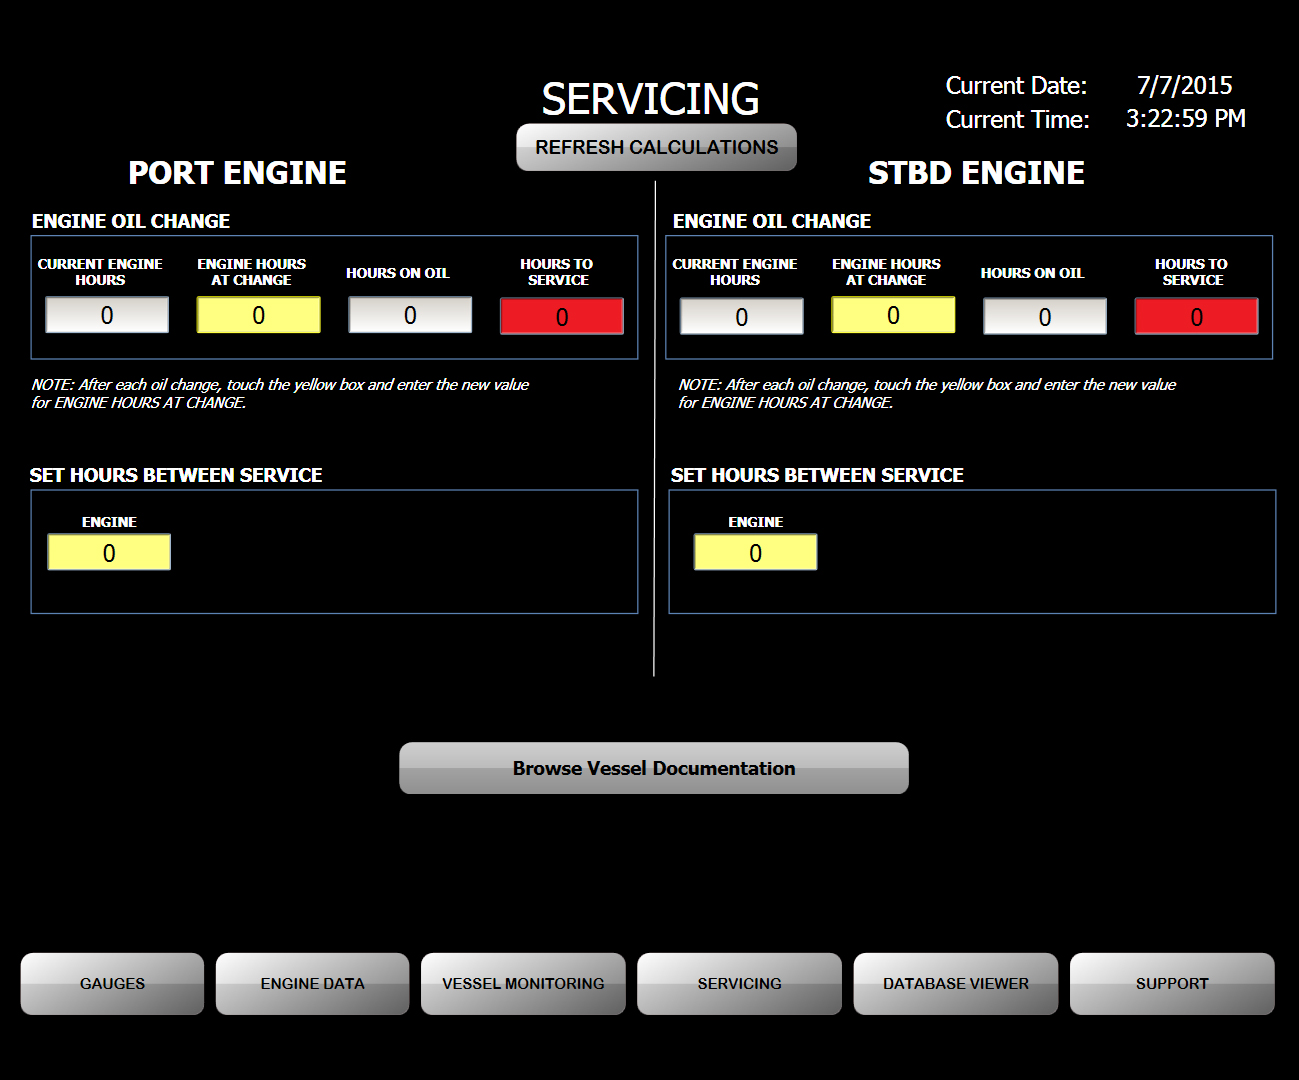 AVM software developed for Canadian Coast Guard. Servicing screen